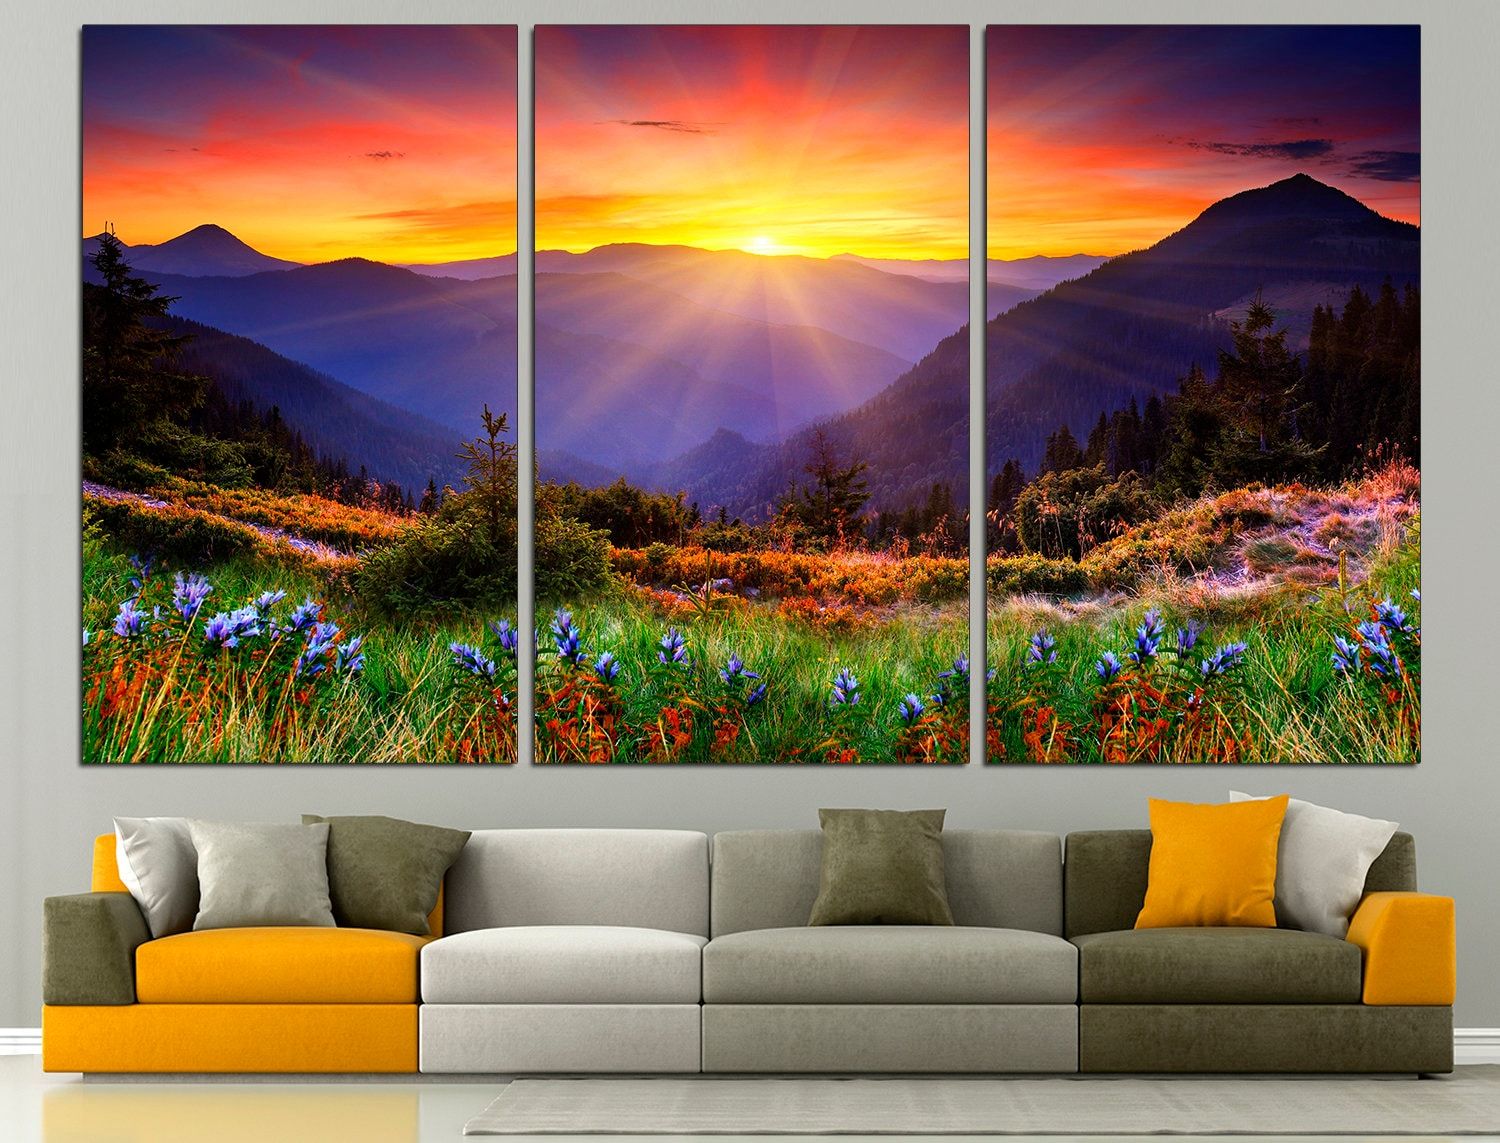 Mountain Print Large Wall Art Sunrise Home Decor Nature Wall – Etsy Denmark Throughout Most Popular Sunrise Wall Art (View 2 of 20)